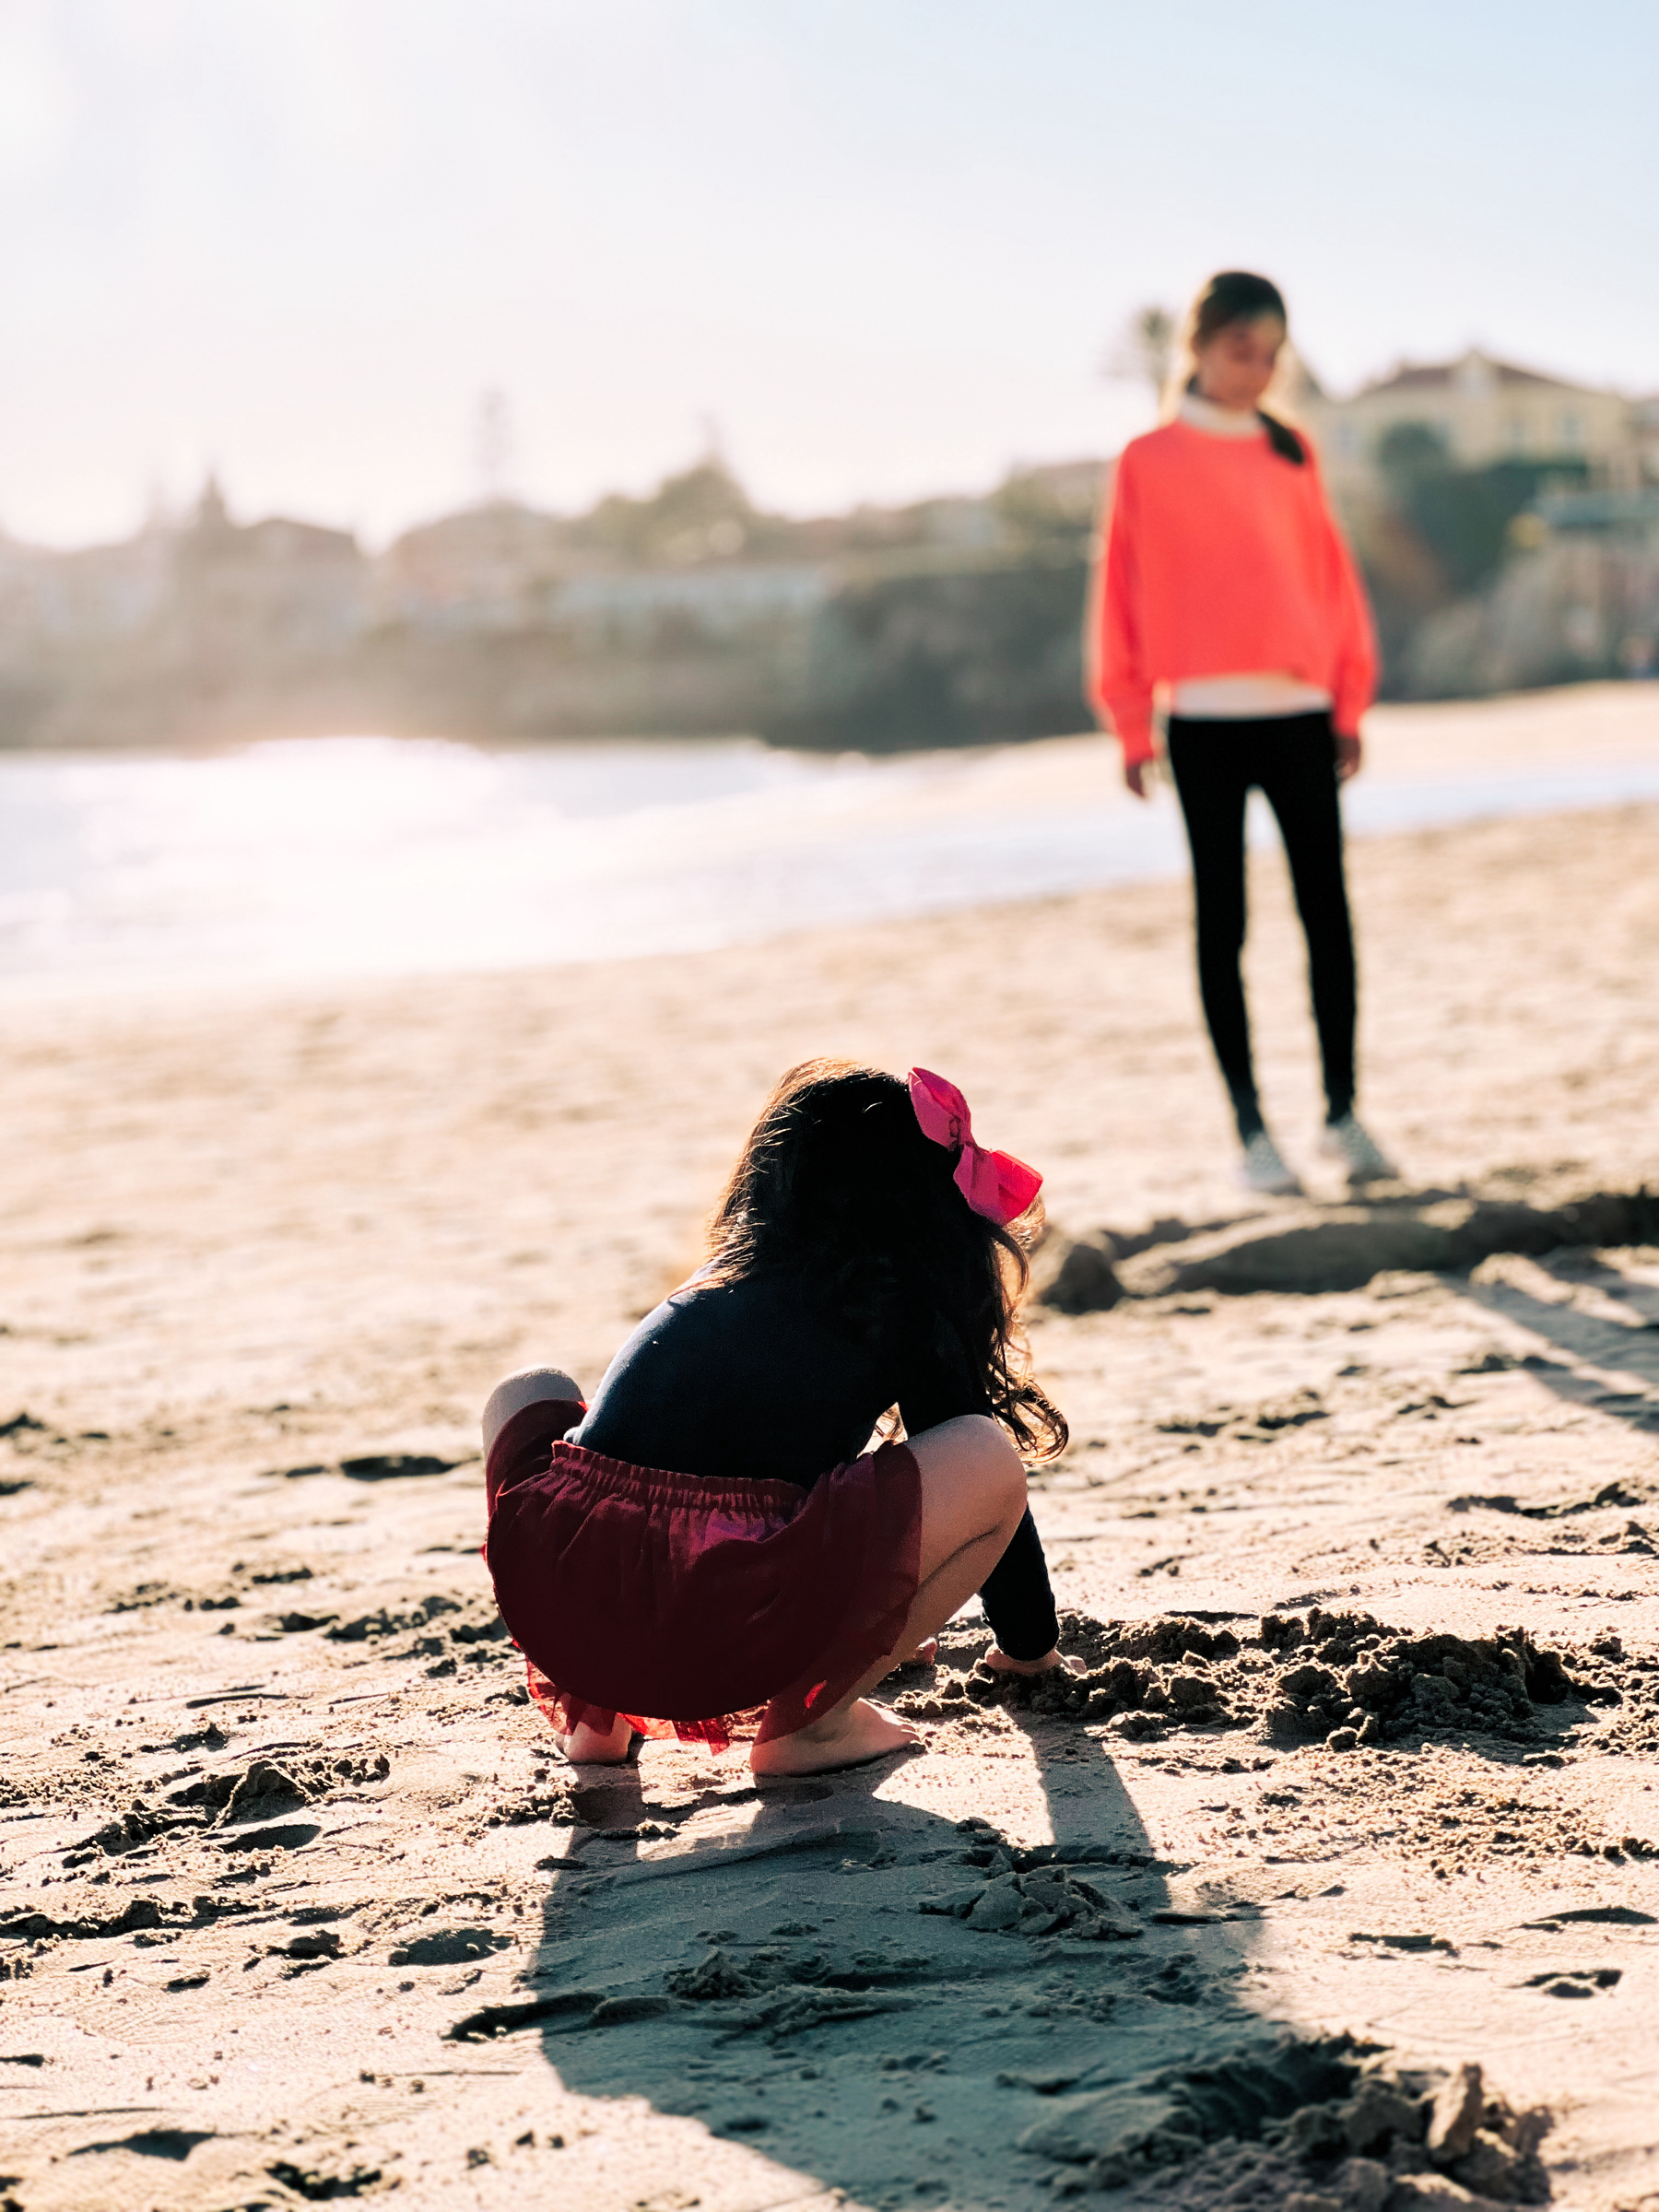 A young girl in a red skirt and black top crouches on a sandy beach, playing in the sand, with a girl standing in the background looking on.